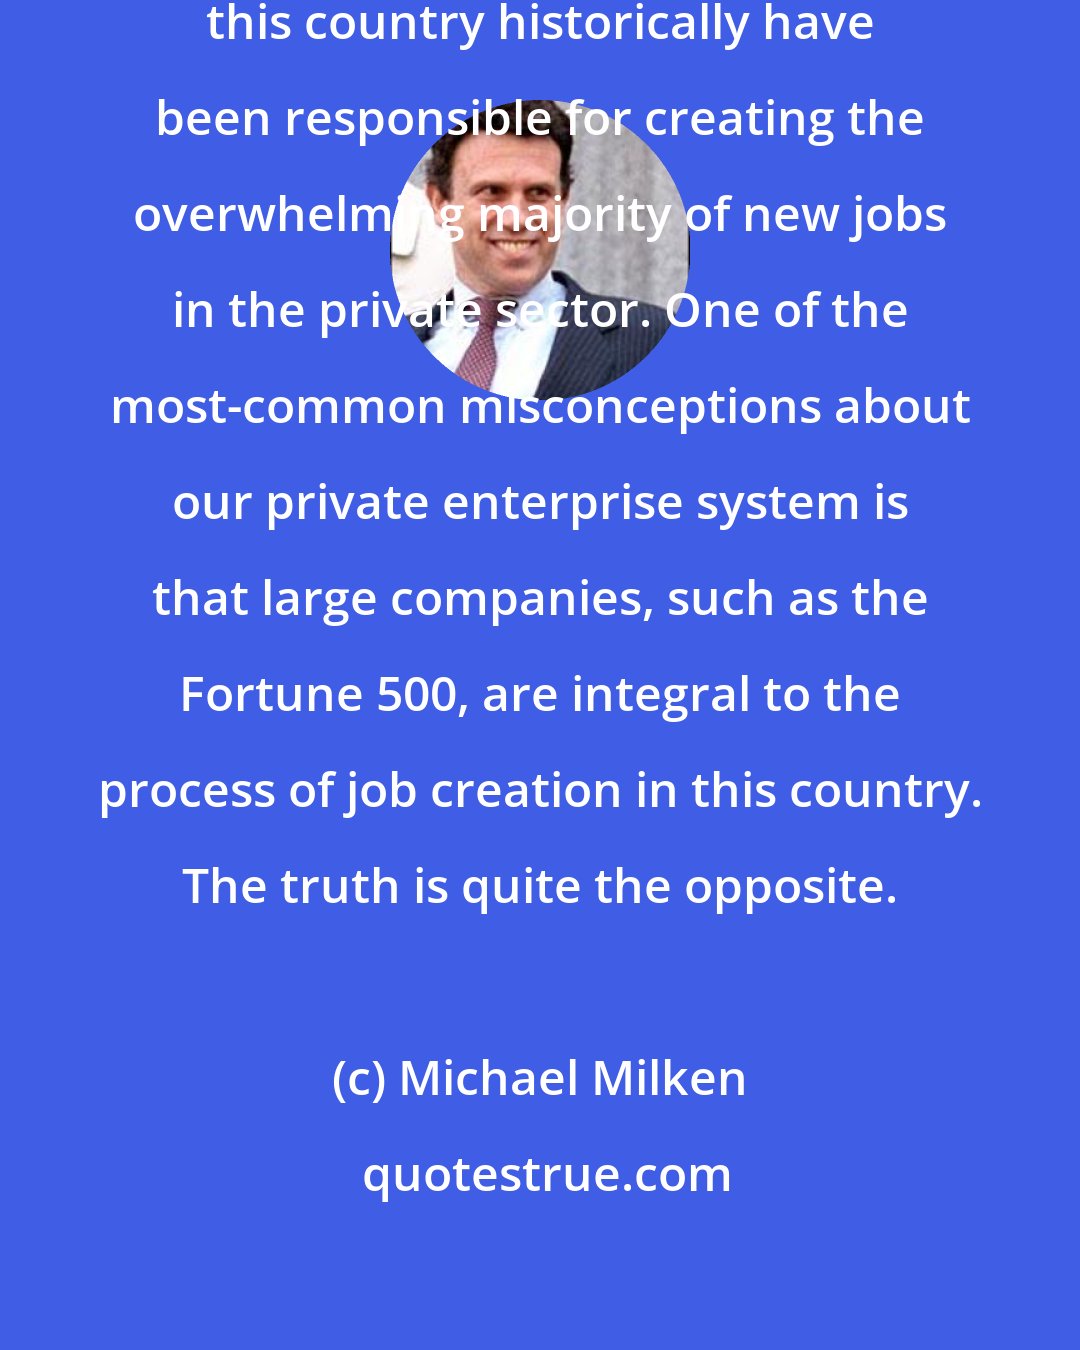 Michael Milken: Small and mid-sized companies in this country historically have been responsible for creating the overwhelming majority of new jobs in the private sector. One of the most-common misconceptions about our private enterprise system is that large companies, such as the Fortune 500, are integral to the process of job creation in this country. The truth is quite the opposite.